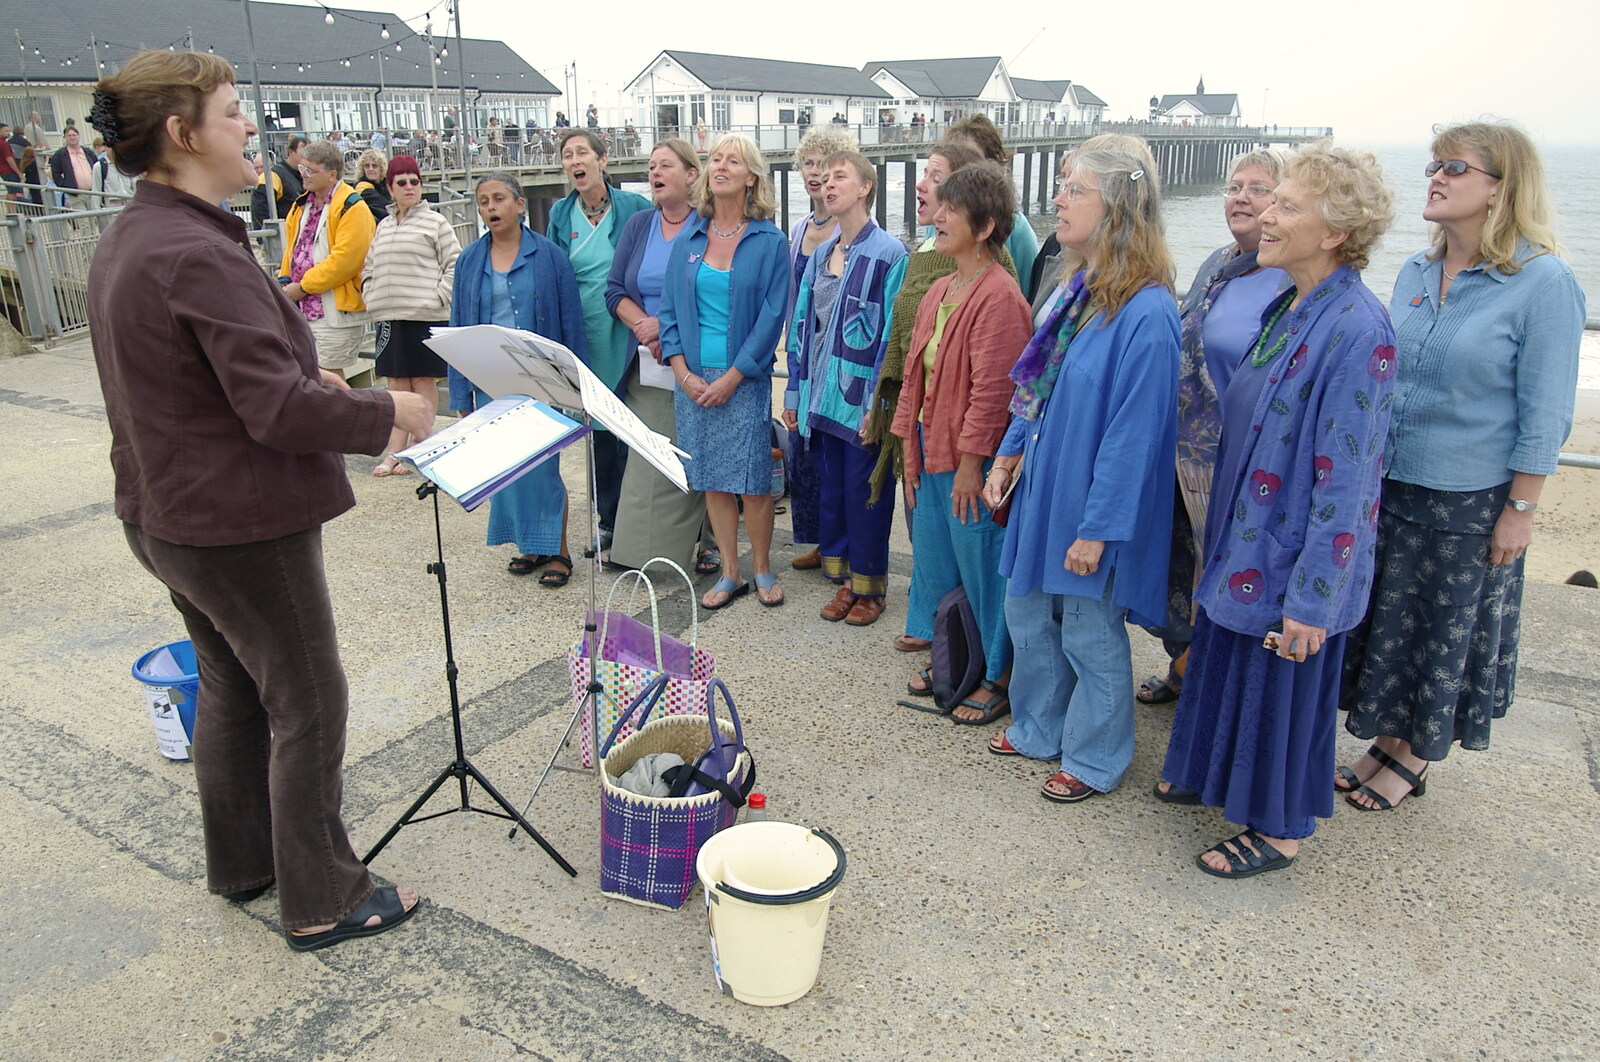 There's a Water-Aid choir performing on the beach from Sally and Paul's Wedding on the Pier, Southwold, Suffolk - 3rd September 2005